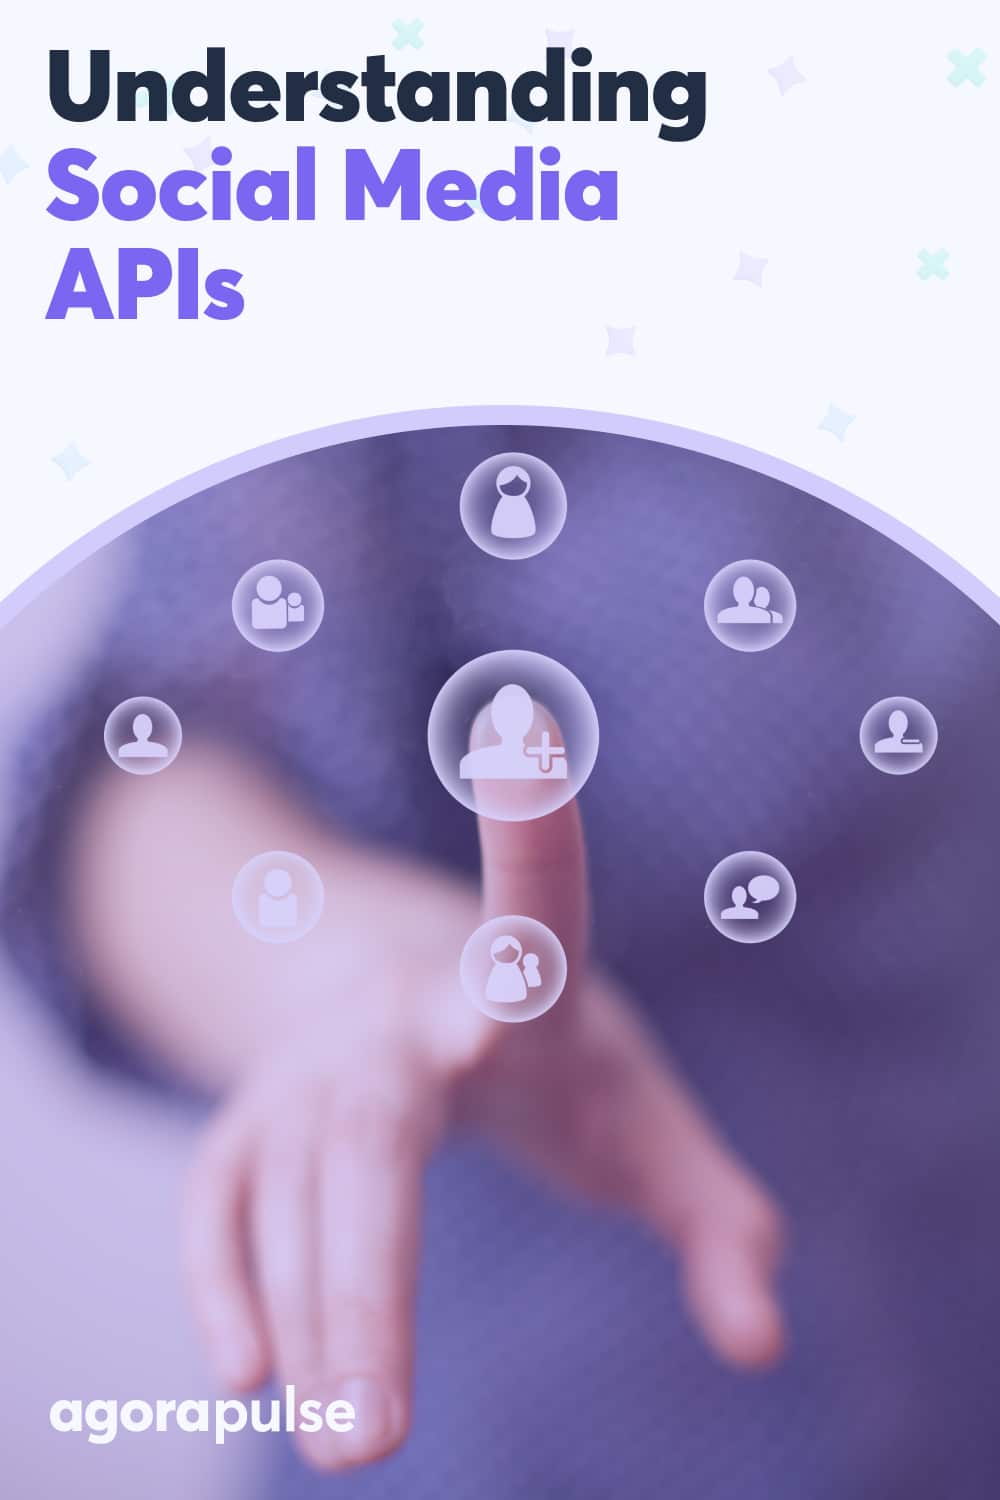 What\'s The Big Deal About APIs And Social Media?